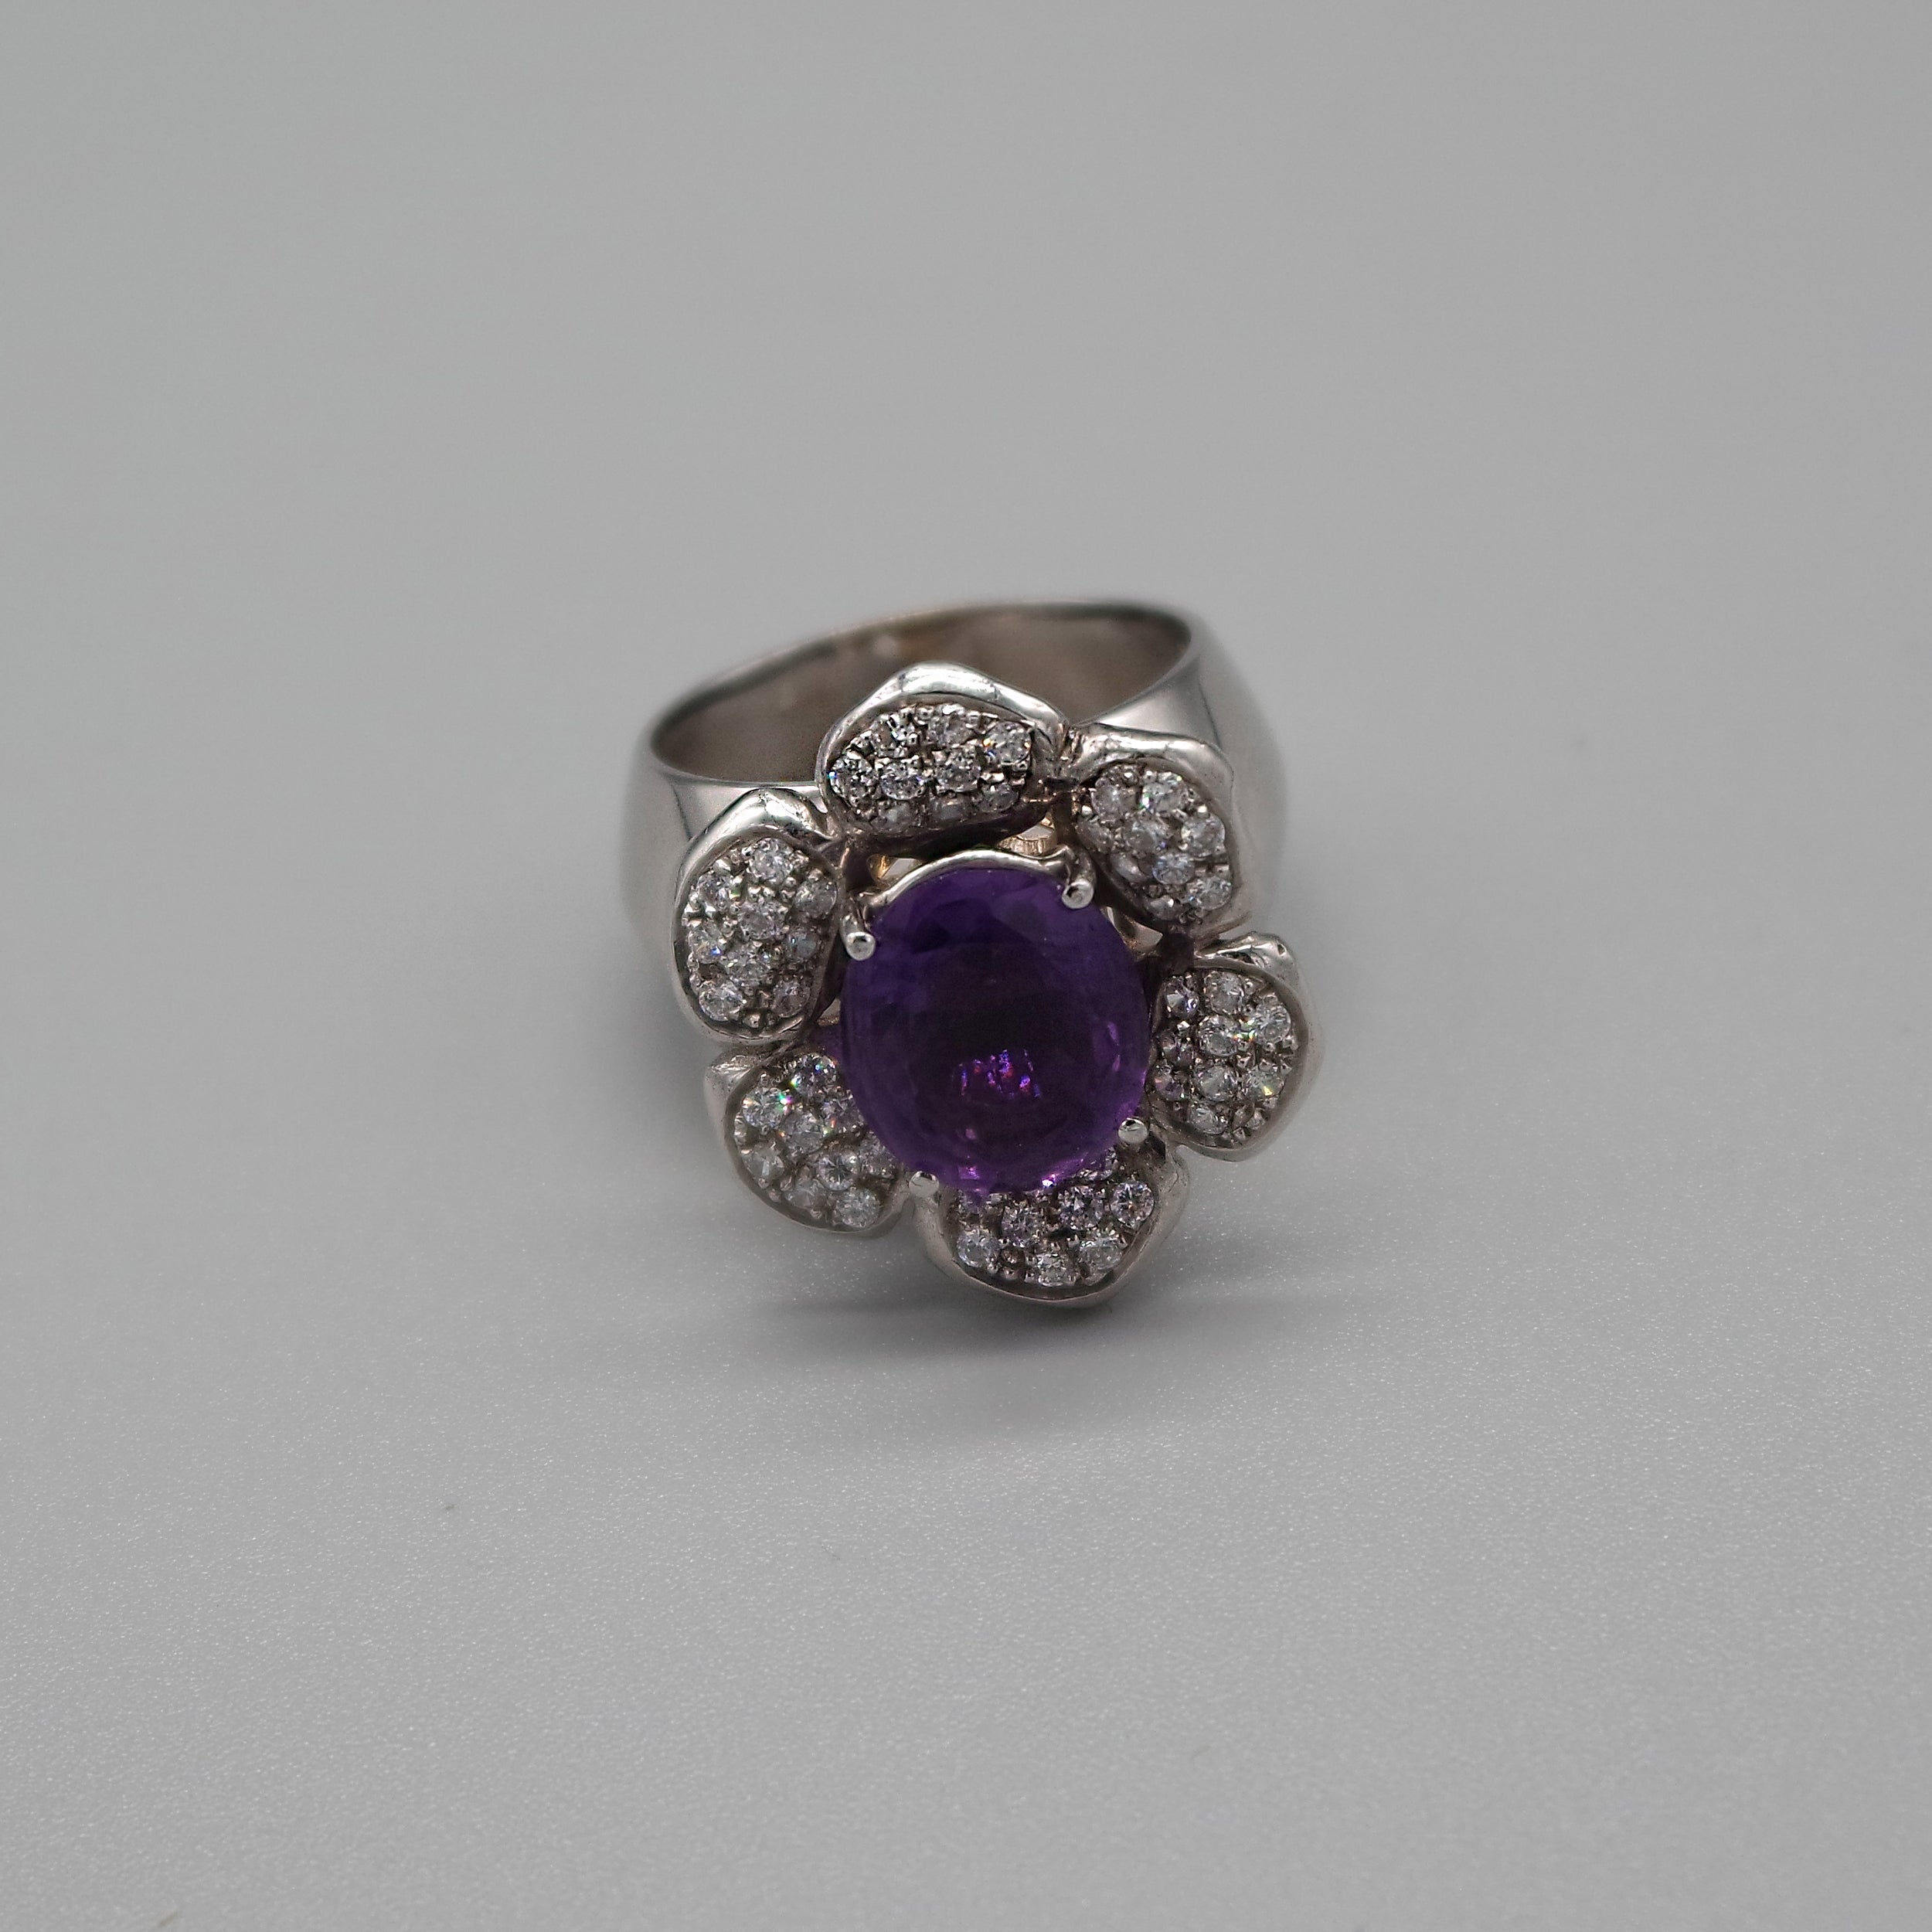 A stunning vintage 4.35 carat amethyst and 0.55 carat diamond, 18 Kt white gold cocktail ring; 

This flower-inspired central displays an oval shape amethyst at the center of the design, flanked by 54 diamonds pavé-set petals. 
The joyful part of